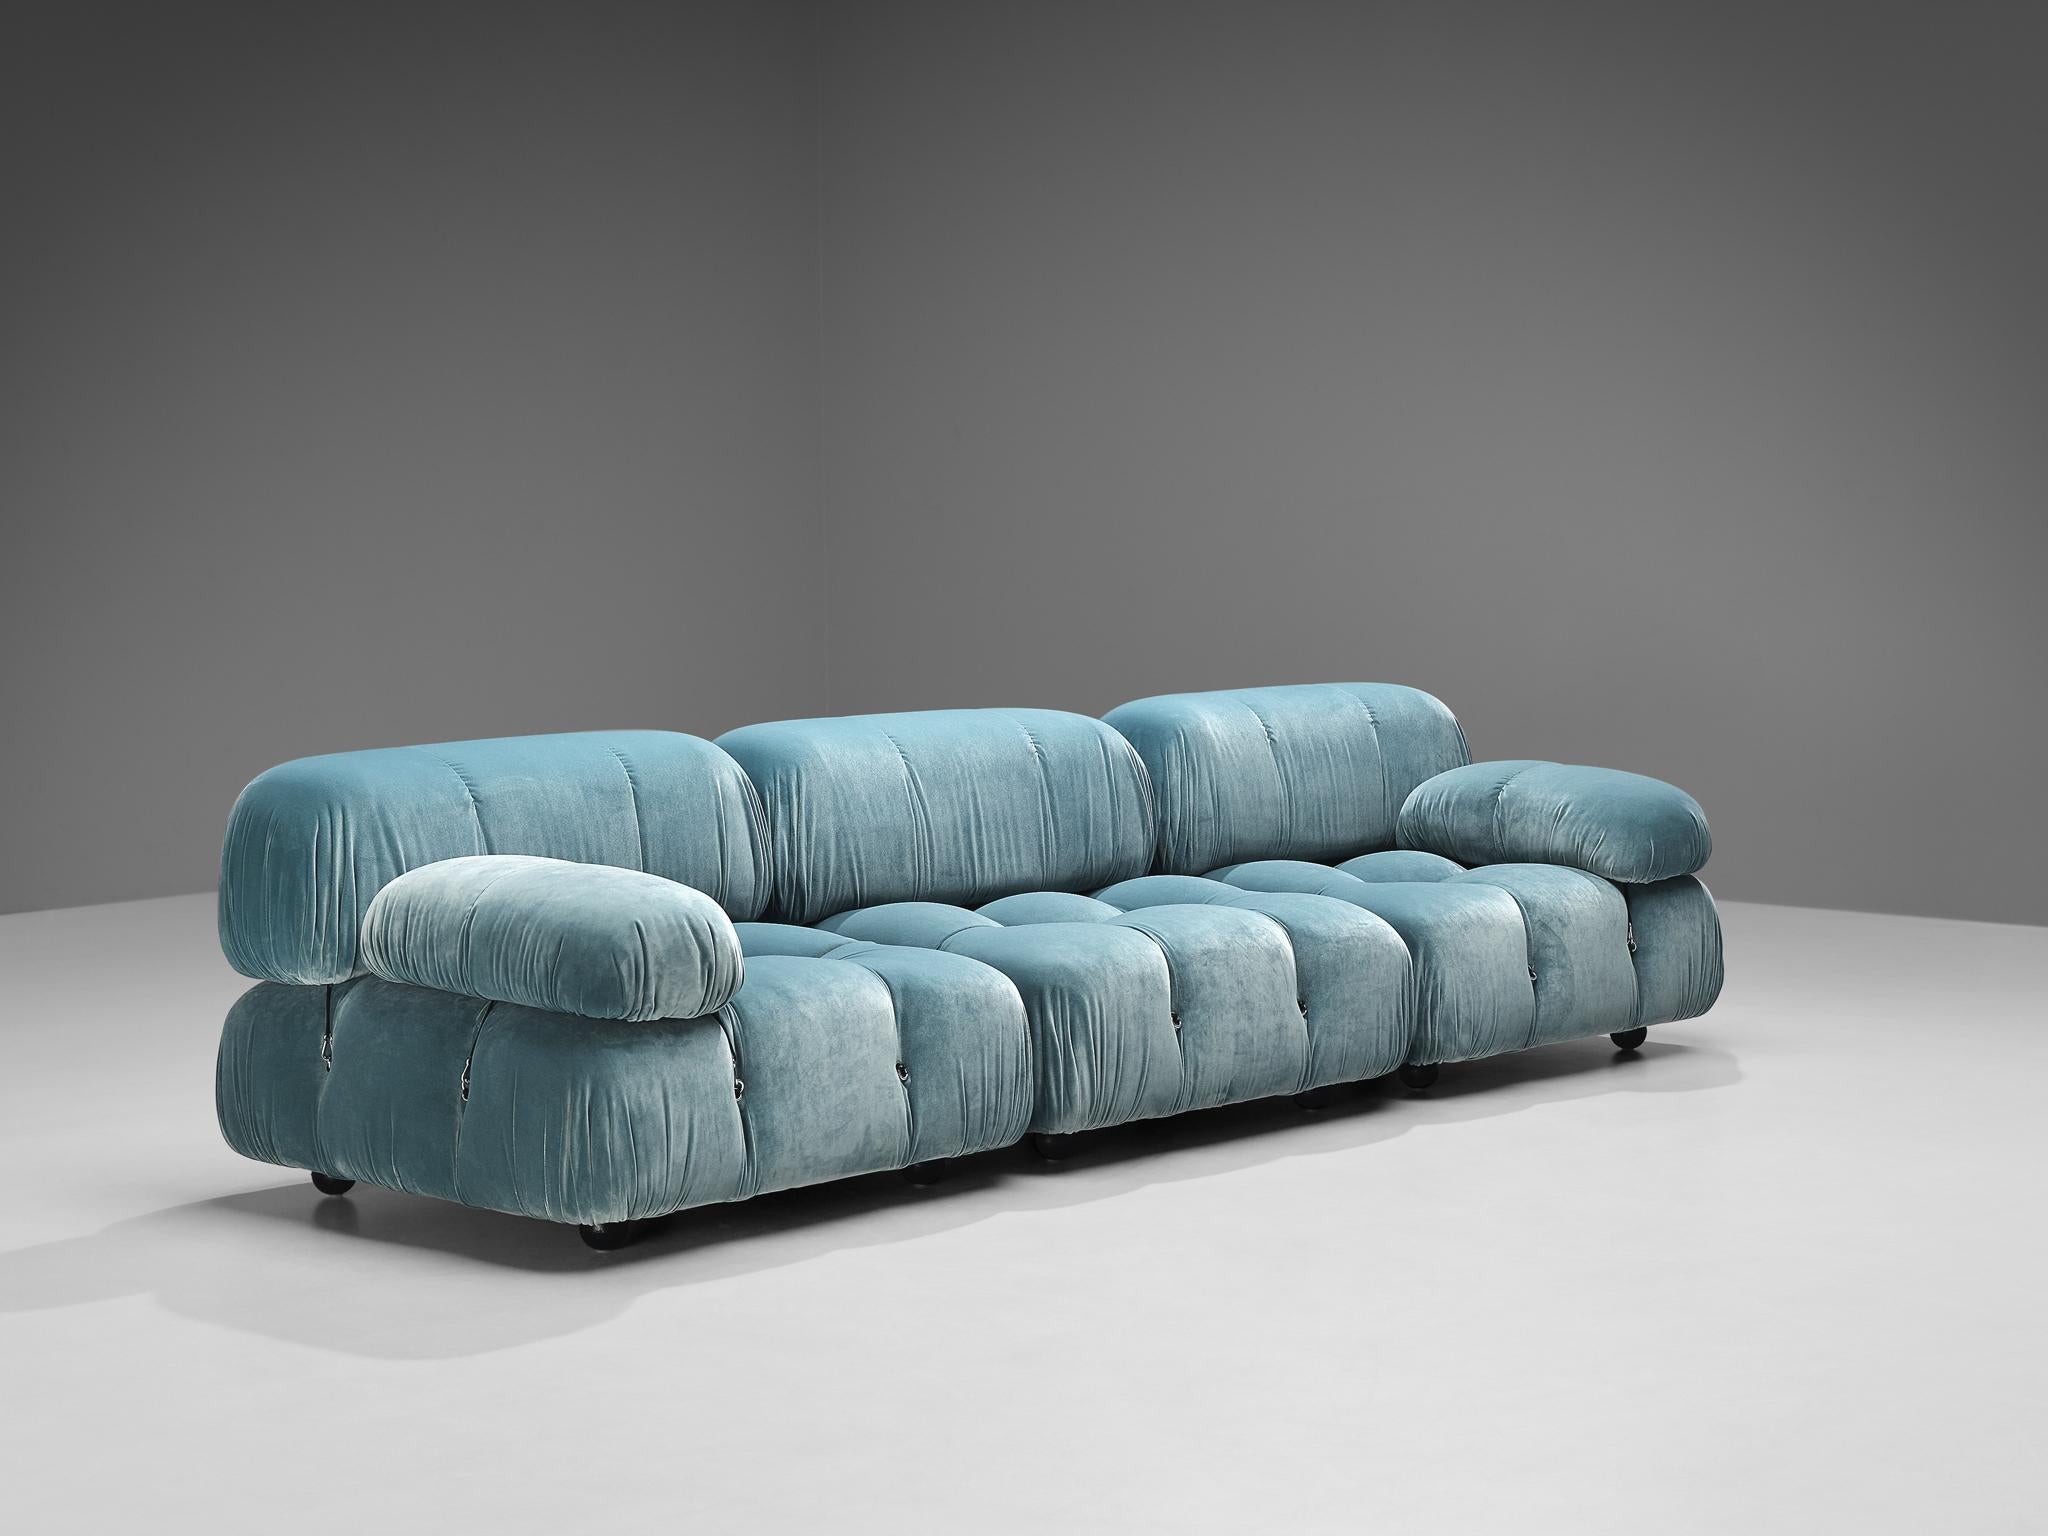 Mario Bellini for B&B Italia, reupholstered 'Camaleonda' sectional sofa, light blue velvet, metal, Italy, design 1970

This iconic sofa is designed by Italian master Mario Bellini for B&B Italia in 1970. The sectional elements of this sofa can be